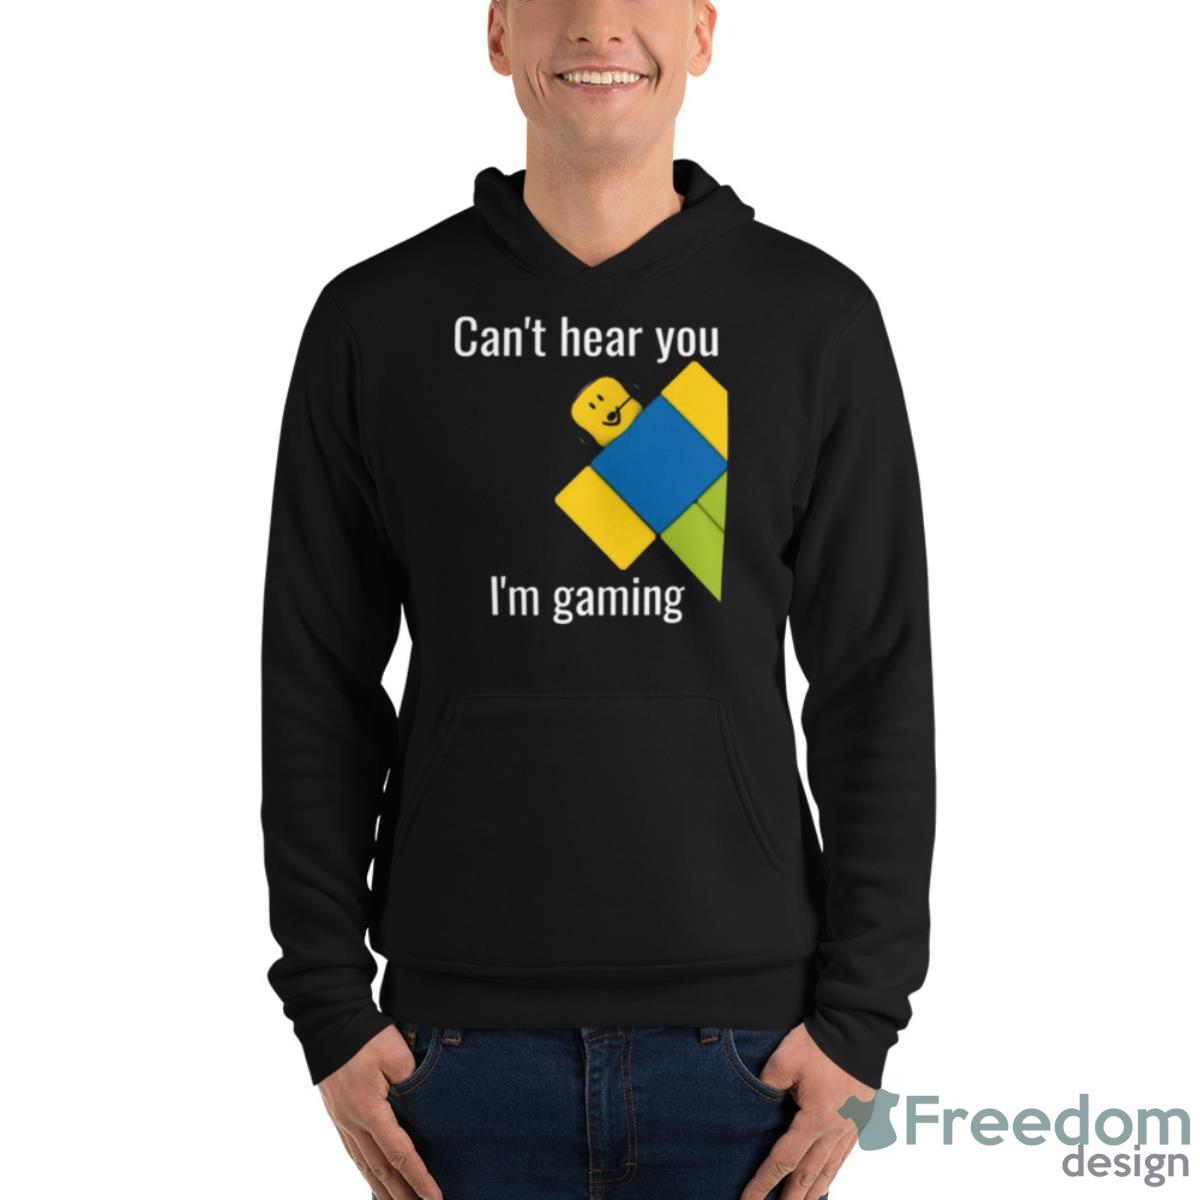 Can't Hear You I'm Gaming Roblox Roblox Noob Roblox Kids Gaming Youth  Unisex T-Shirt – Teepital – Everyday New Aesthetic Designs